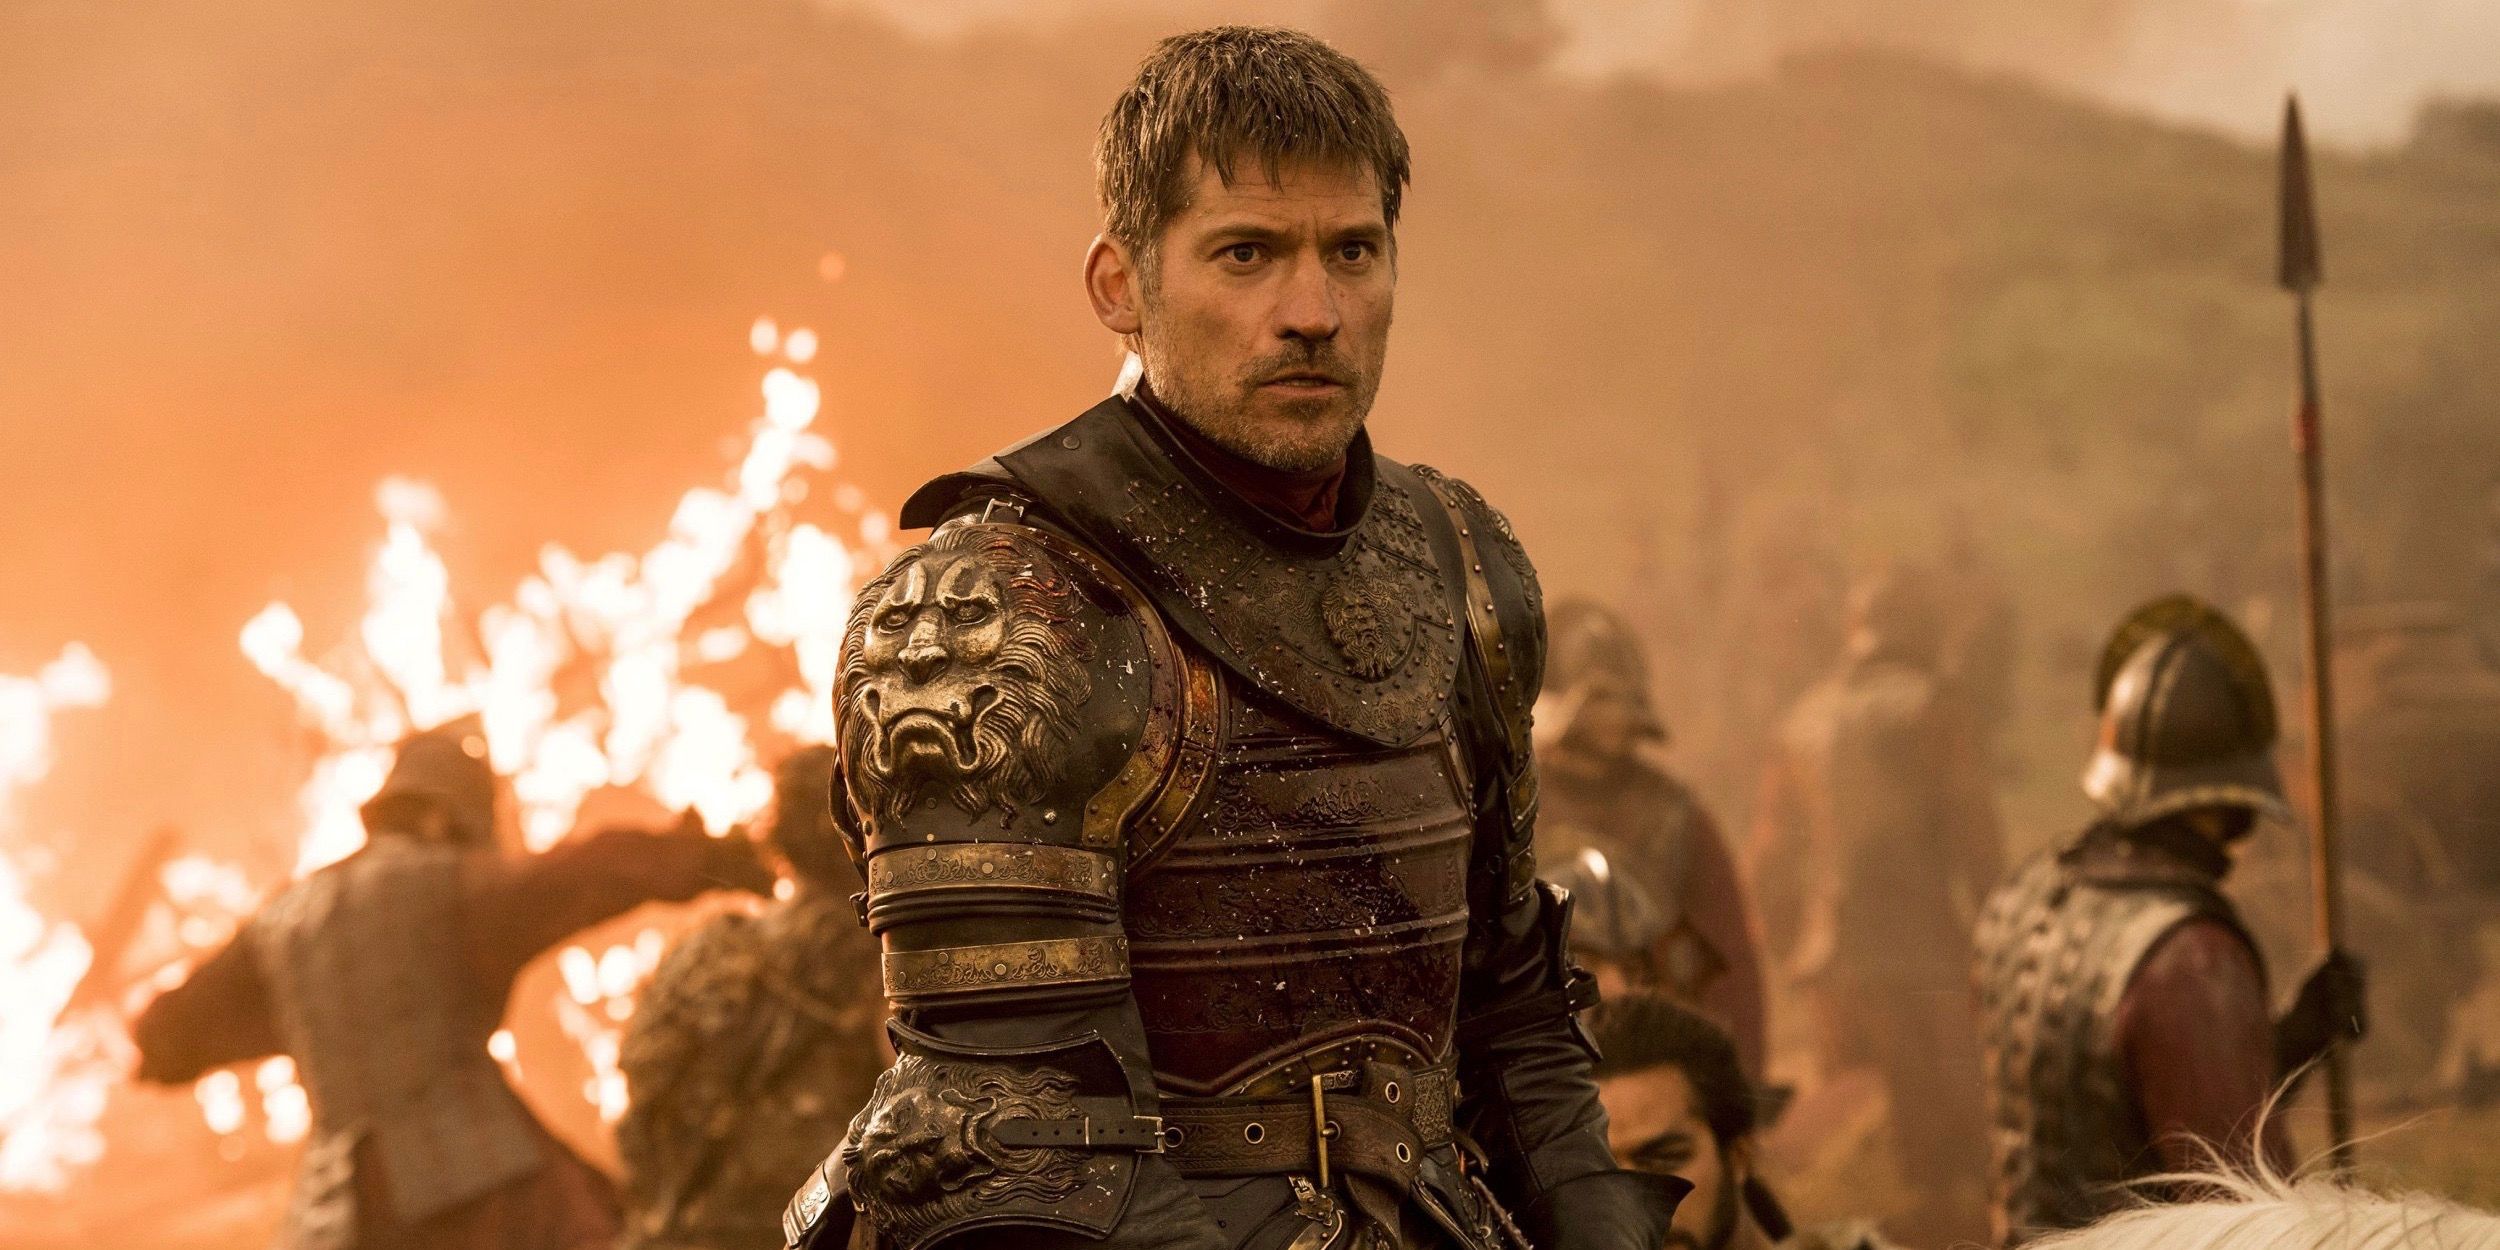 10 New Yearss Resolutions Inspired by Game of Thrones Characters